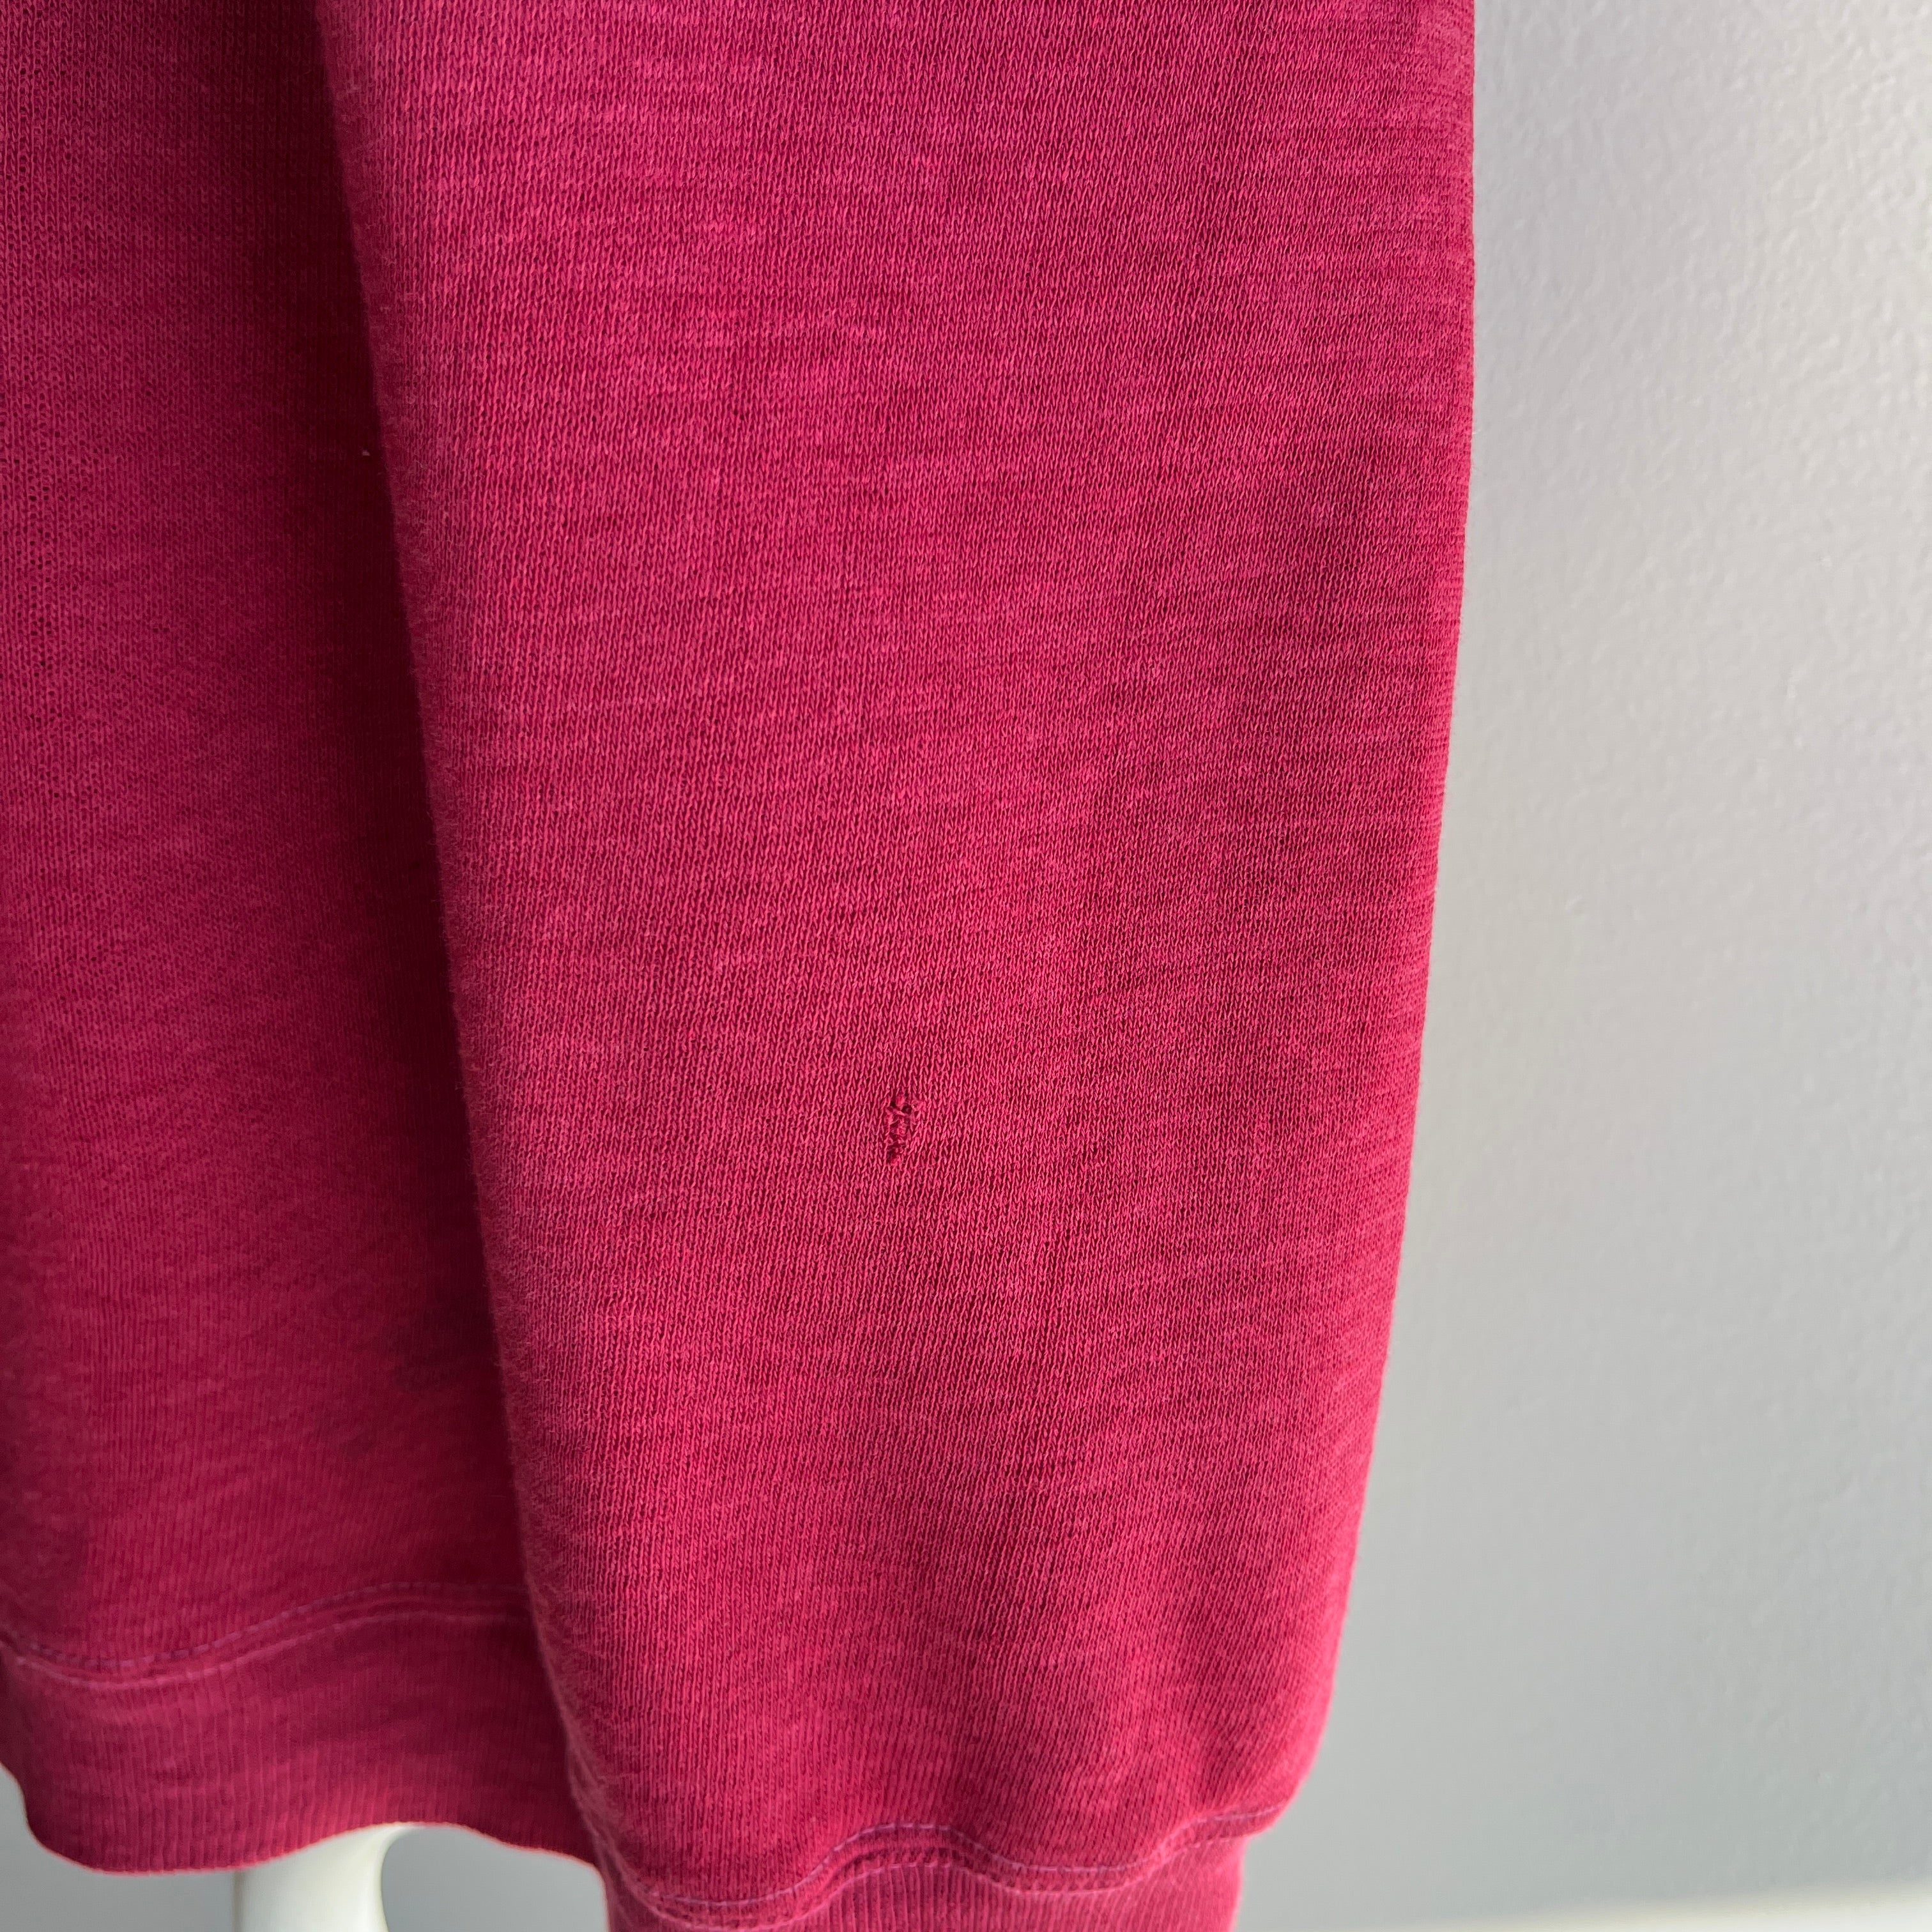 1970/80s Magenta Beauty with Contrast Stitching